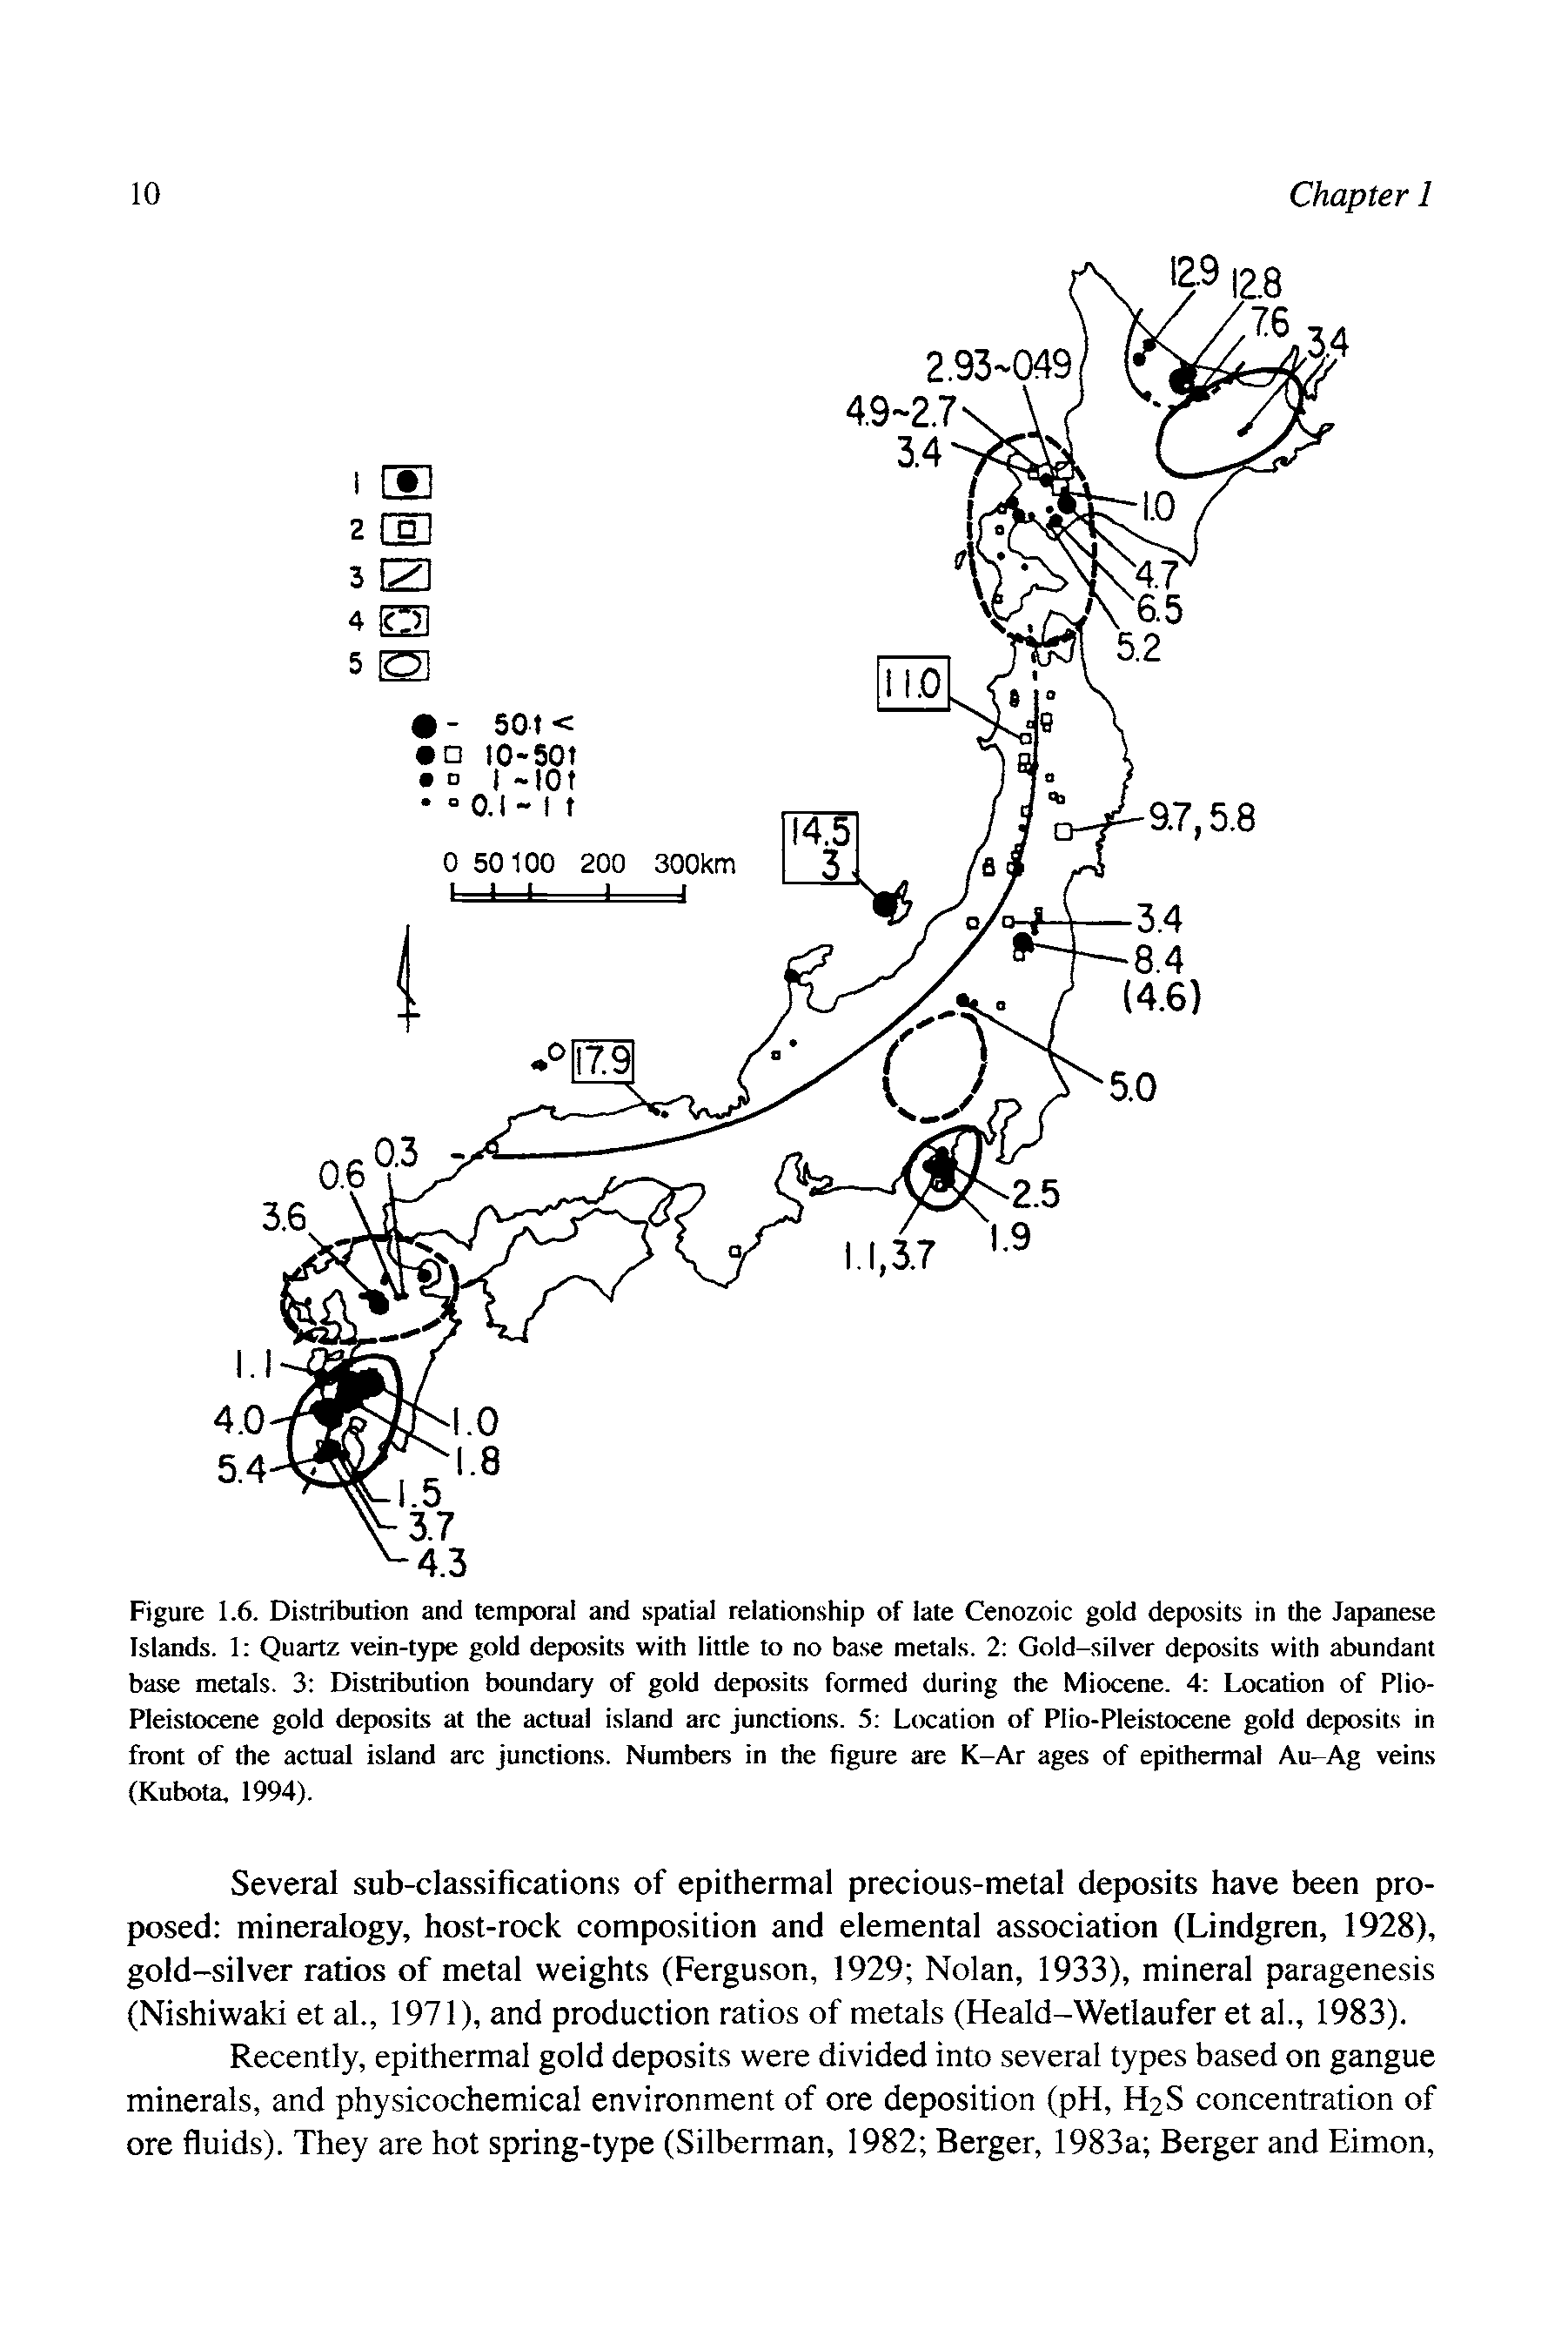 Figure 1.6. Di.stribution and temporal and spatial relationship of late Cenozoic gold deposits in the Japanese Islands. 1 Quartz vein-type gold deposits with little to no base metals. 2 Gold-silver deposits with abundant base metals. 3 Distribution boundary of gold deposits formed during the Miocene. 4 Location of Plio-Pleistocene gold deposits at the actual island arc junctions. 5 Location of Plio-Pleistocene gold deposits in front of the actual island arc junctions. Numbers in the figure are K-Ar ages of epithermal Au-Ag veins (Kubota, 1994).